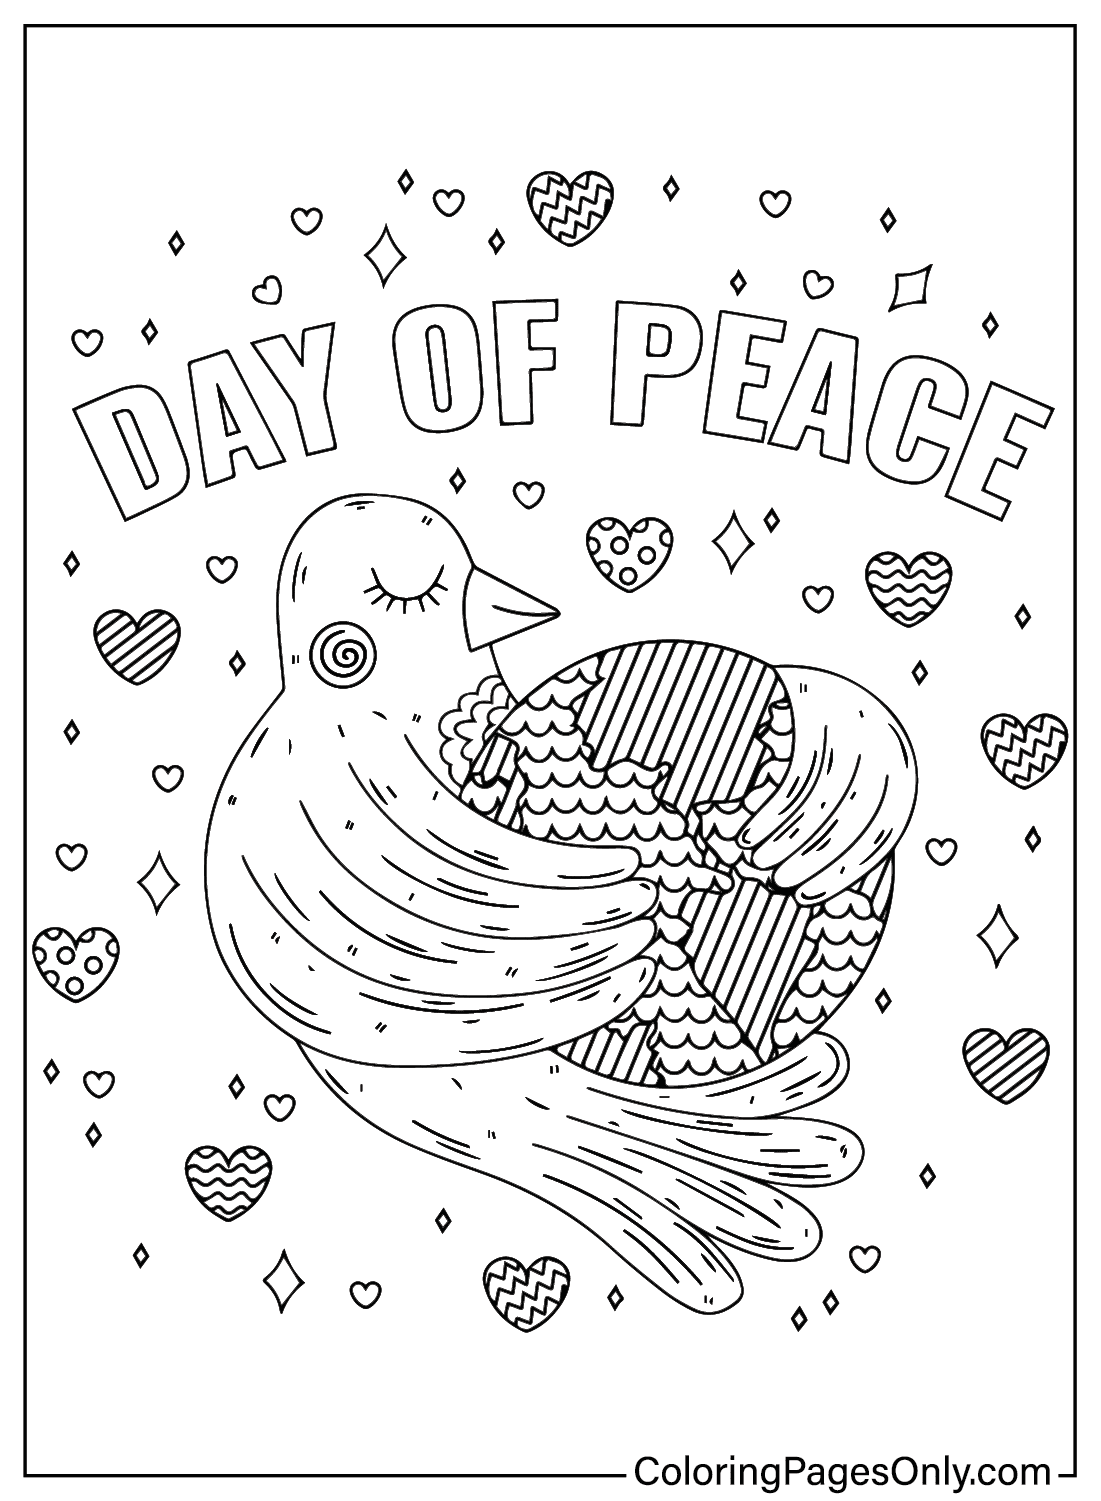 Day of Peace Coloring Pages to Printable